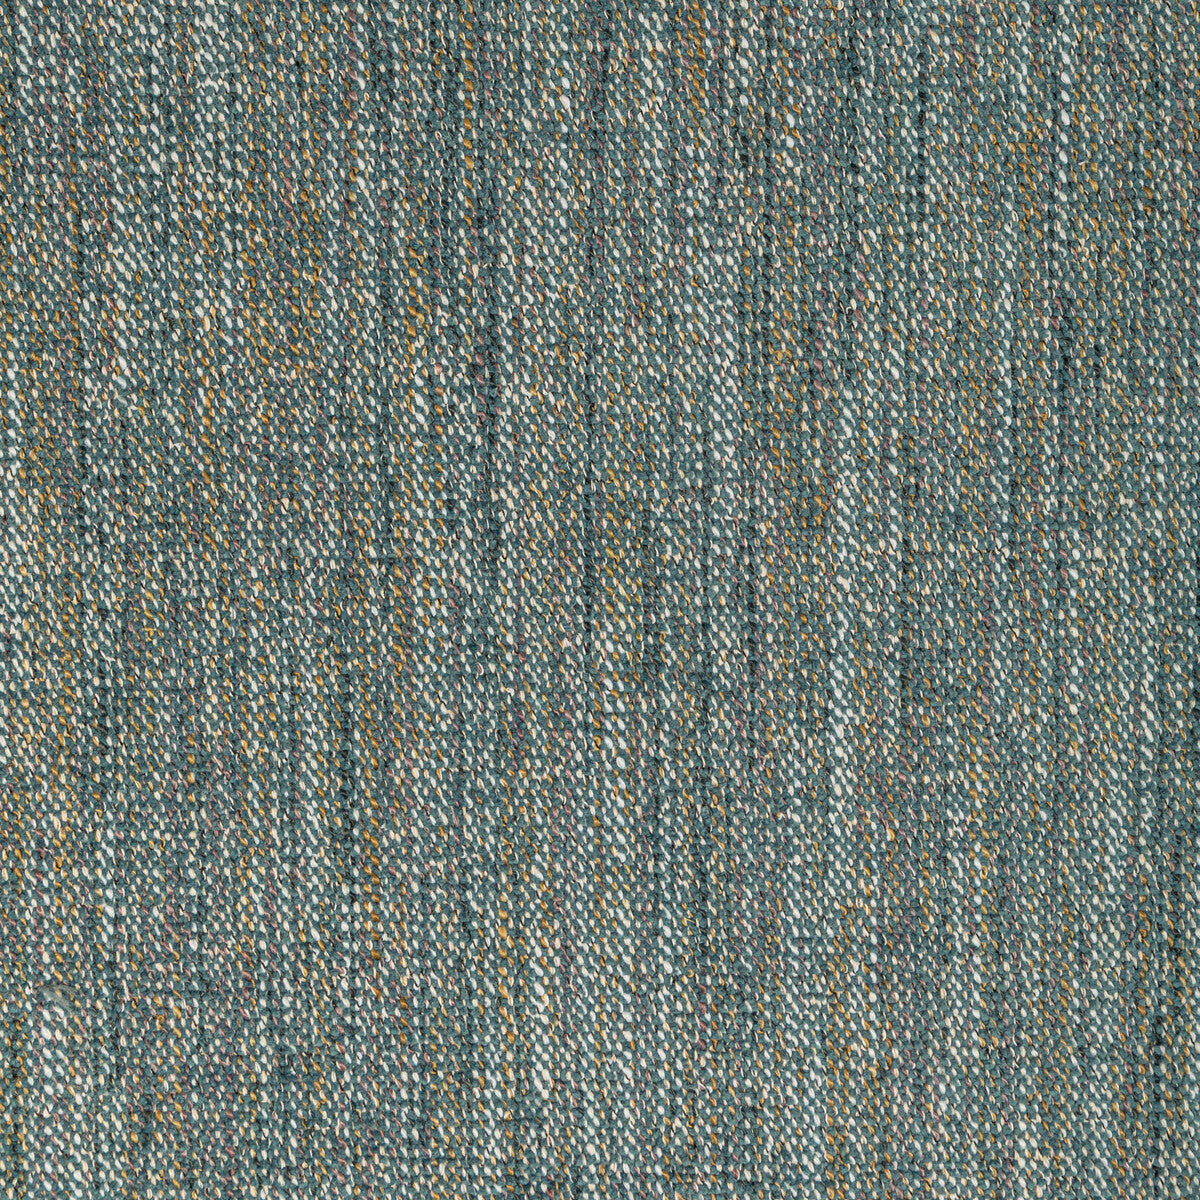 Delfino fabric in chambray color - pattern 36748.5.0 - by Kravet Contract in the Refined Textures Performance Crypton collection